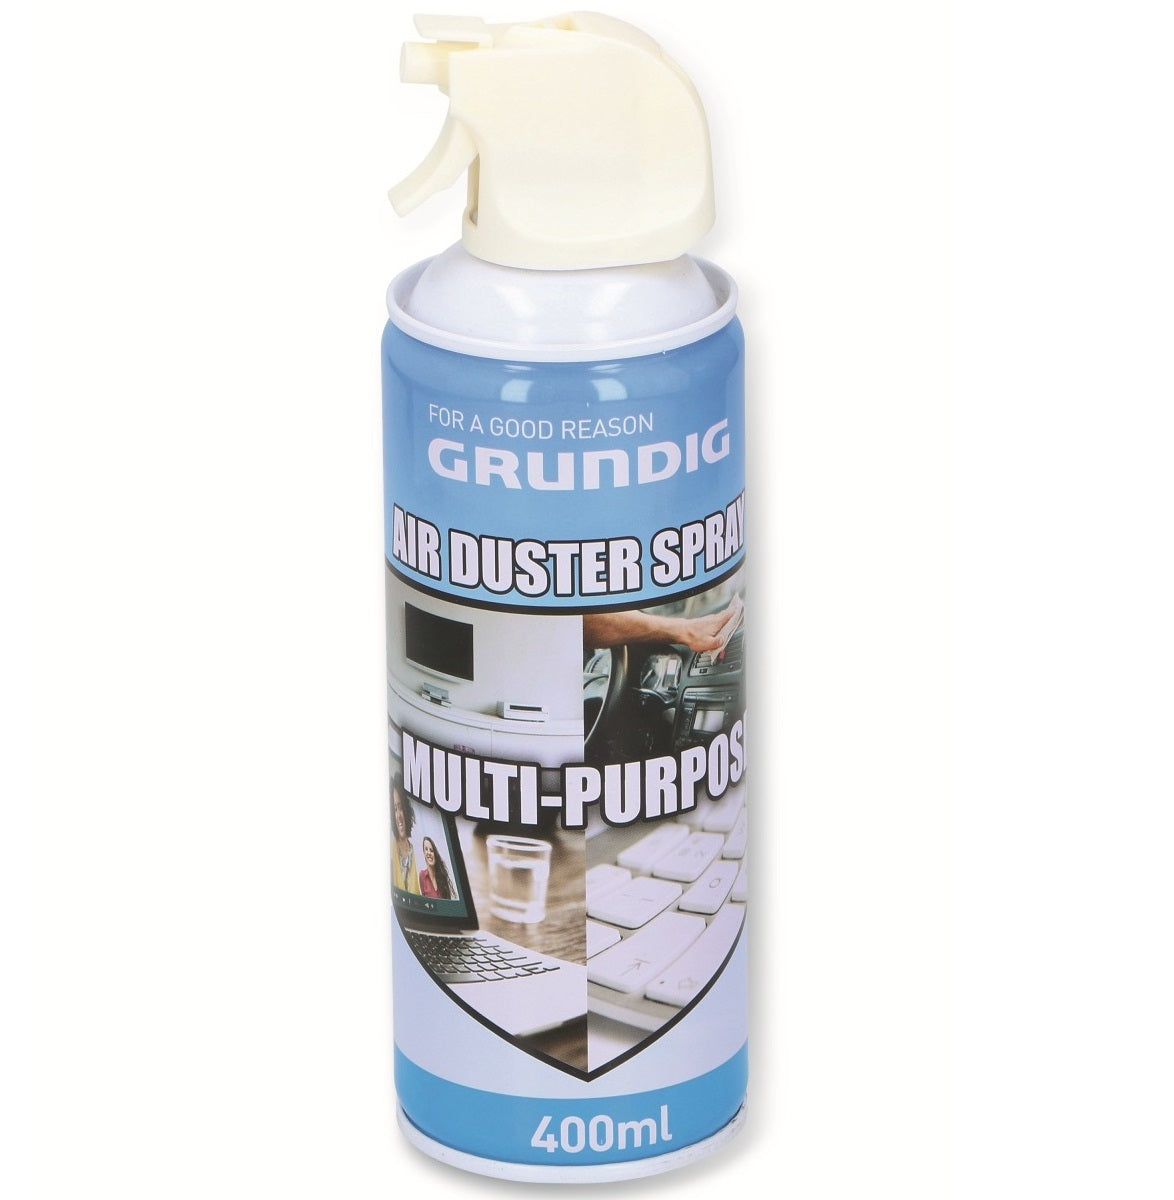 Air Duster Spray Gas Cleaner 300ml Compressed Dust Blower PC